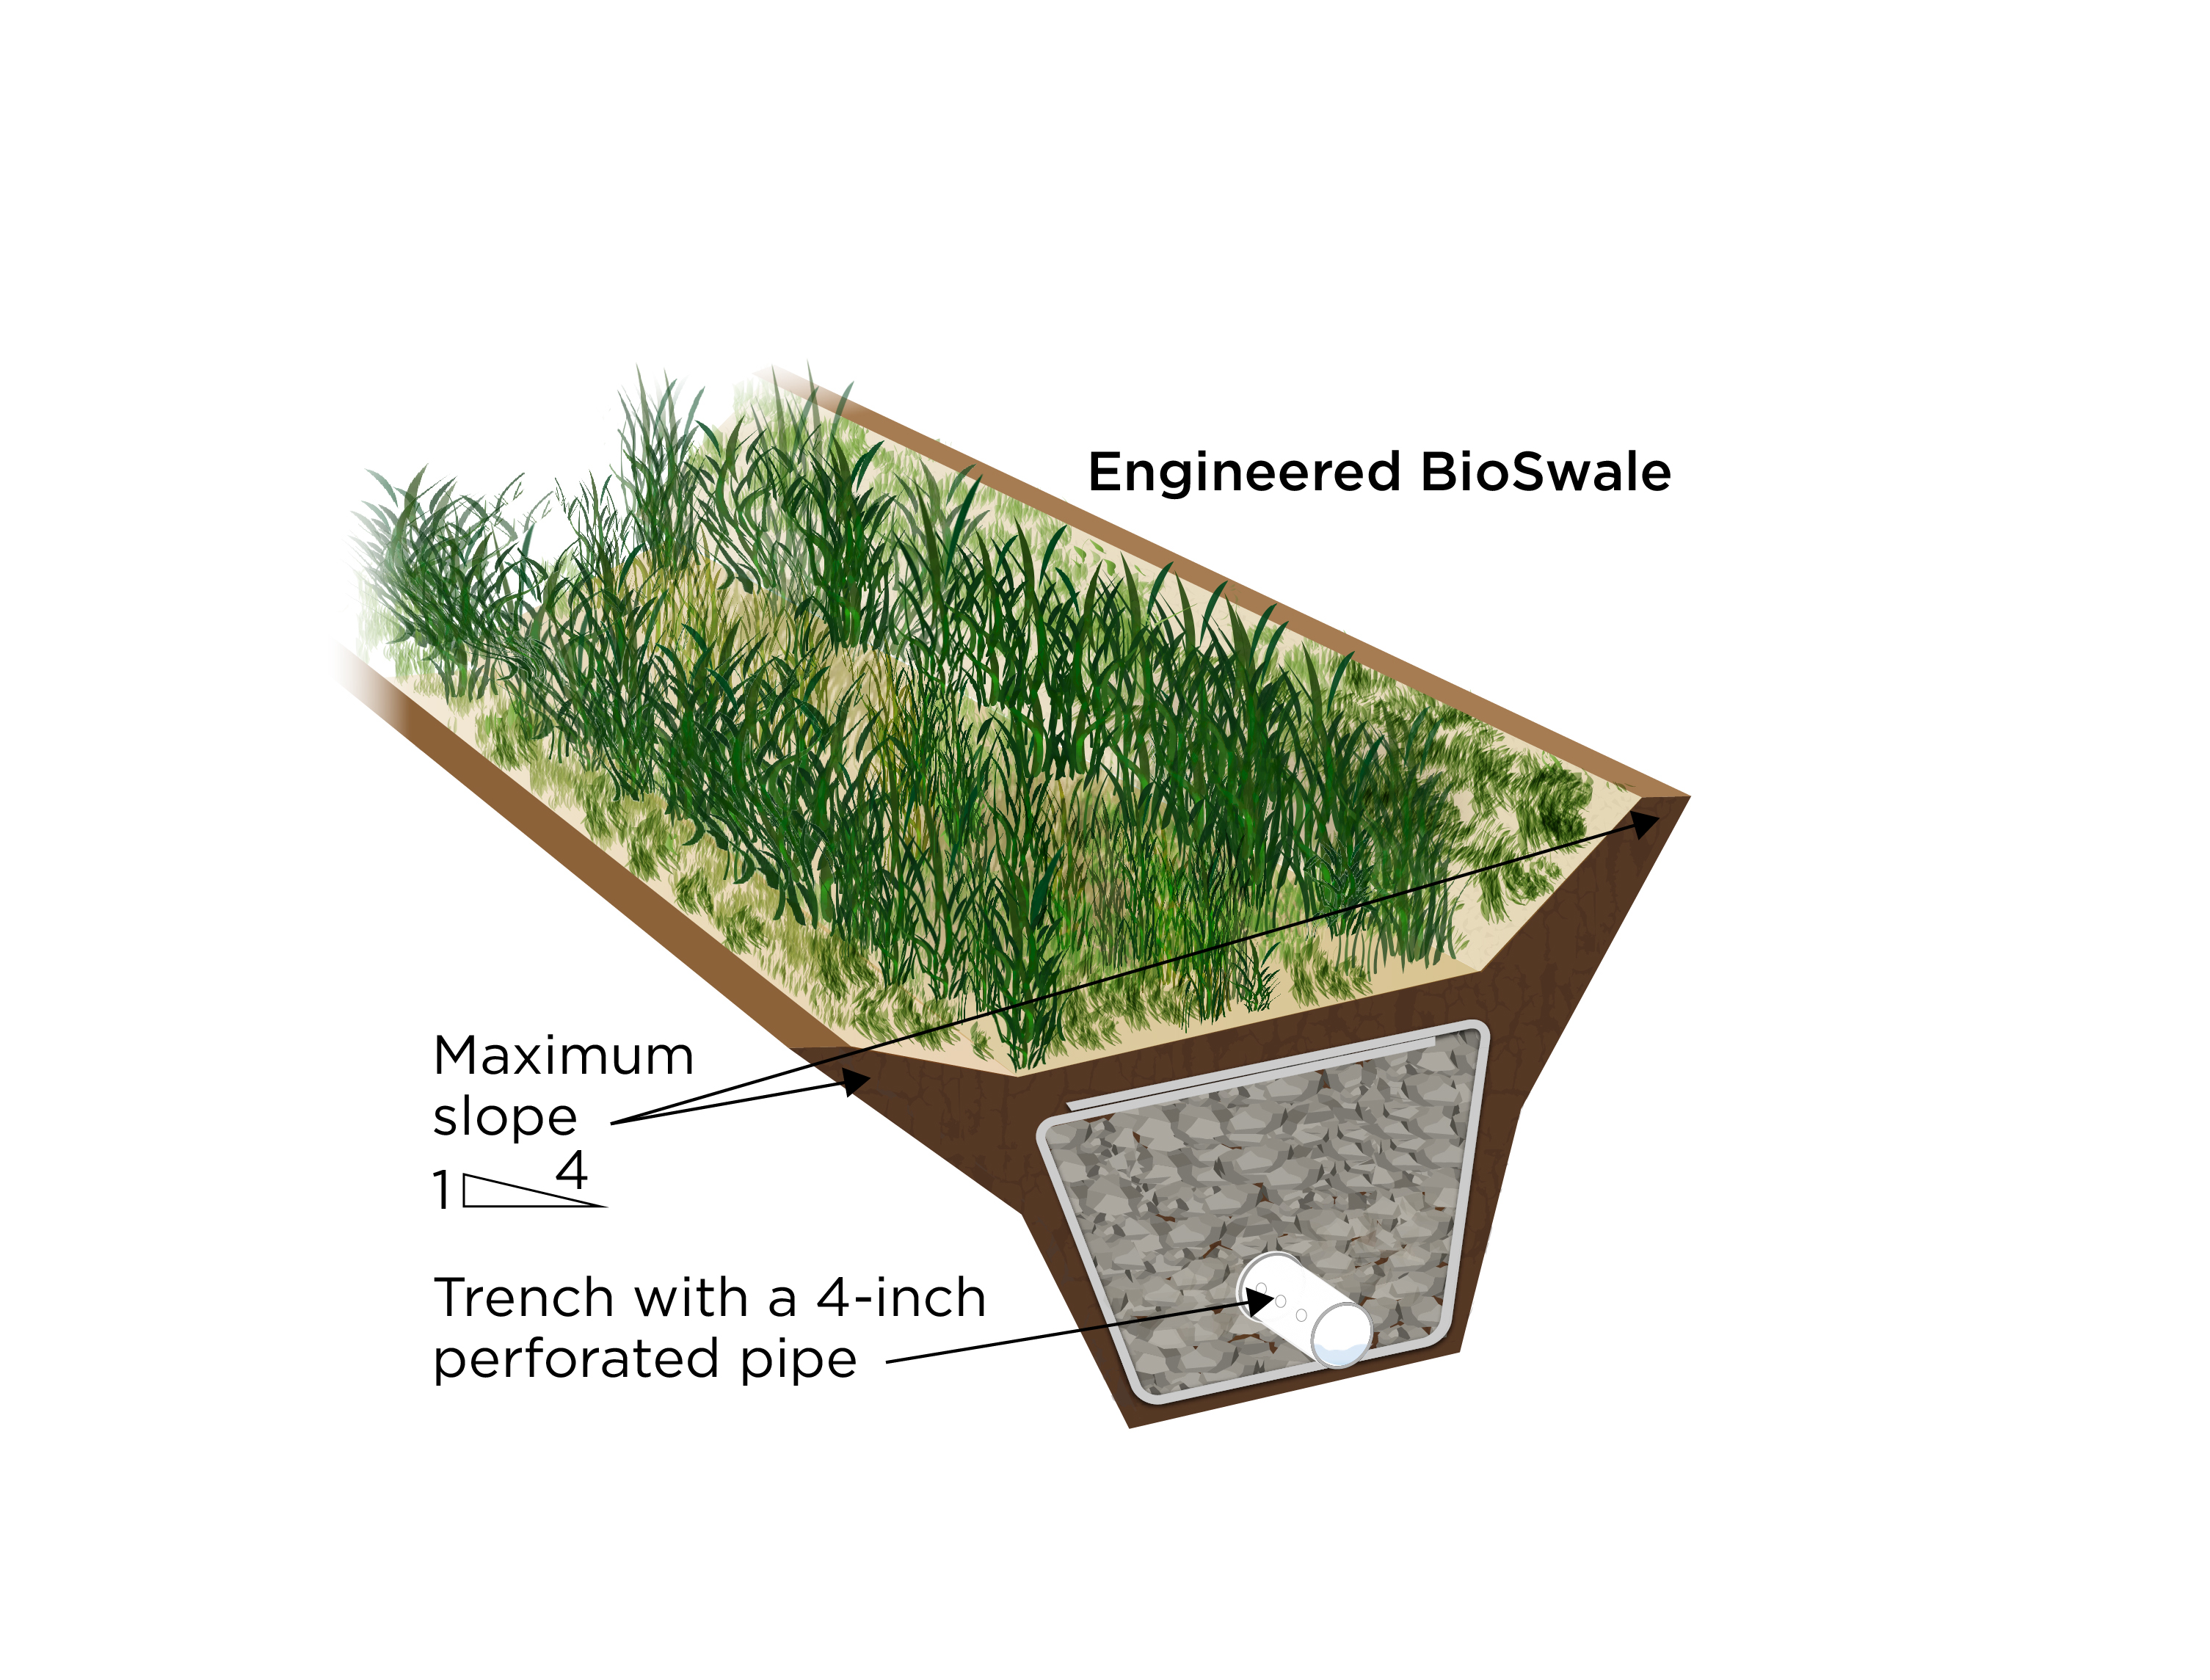 An engineered bioswale uses perforated pipe laid in rock and landscape fabric at the bottom of a vegetated trench to direct water away from a site.